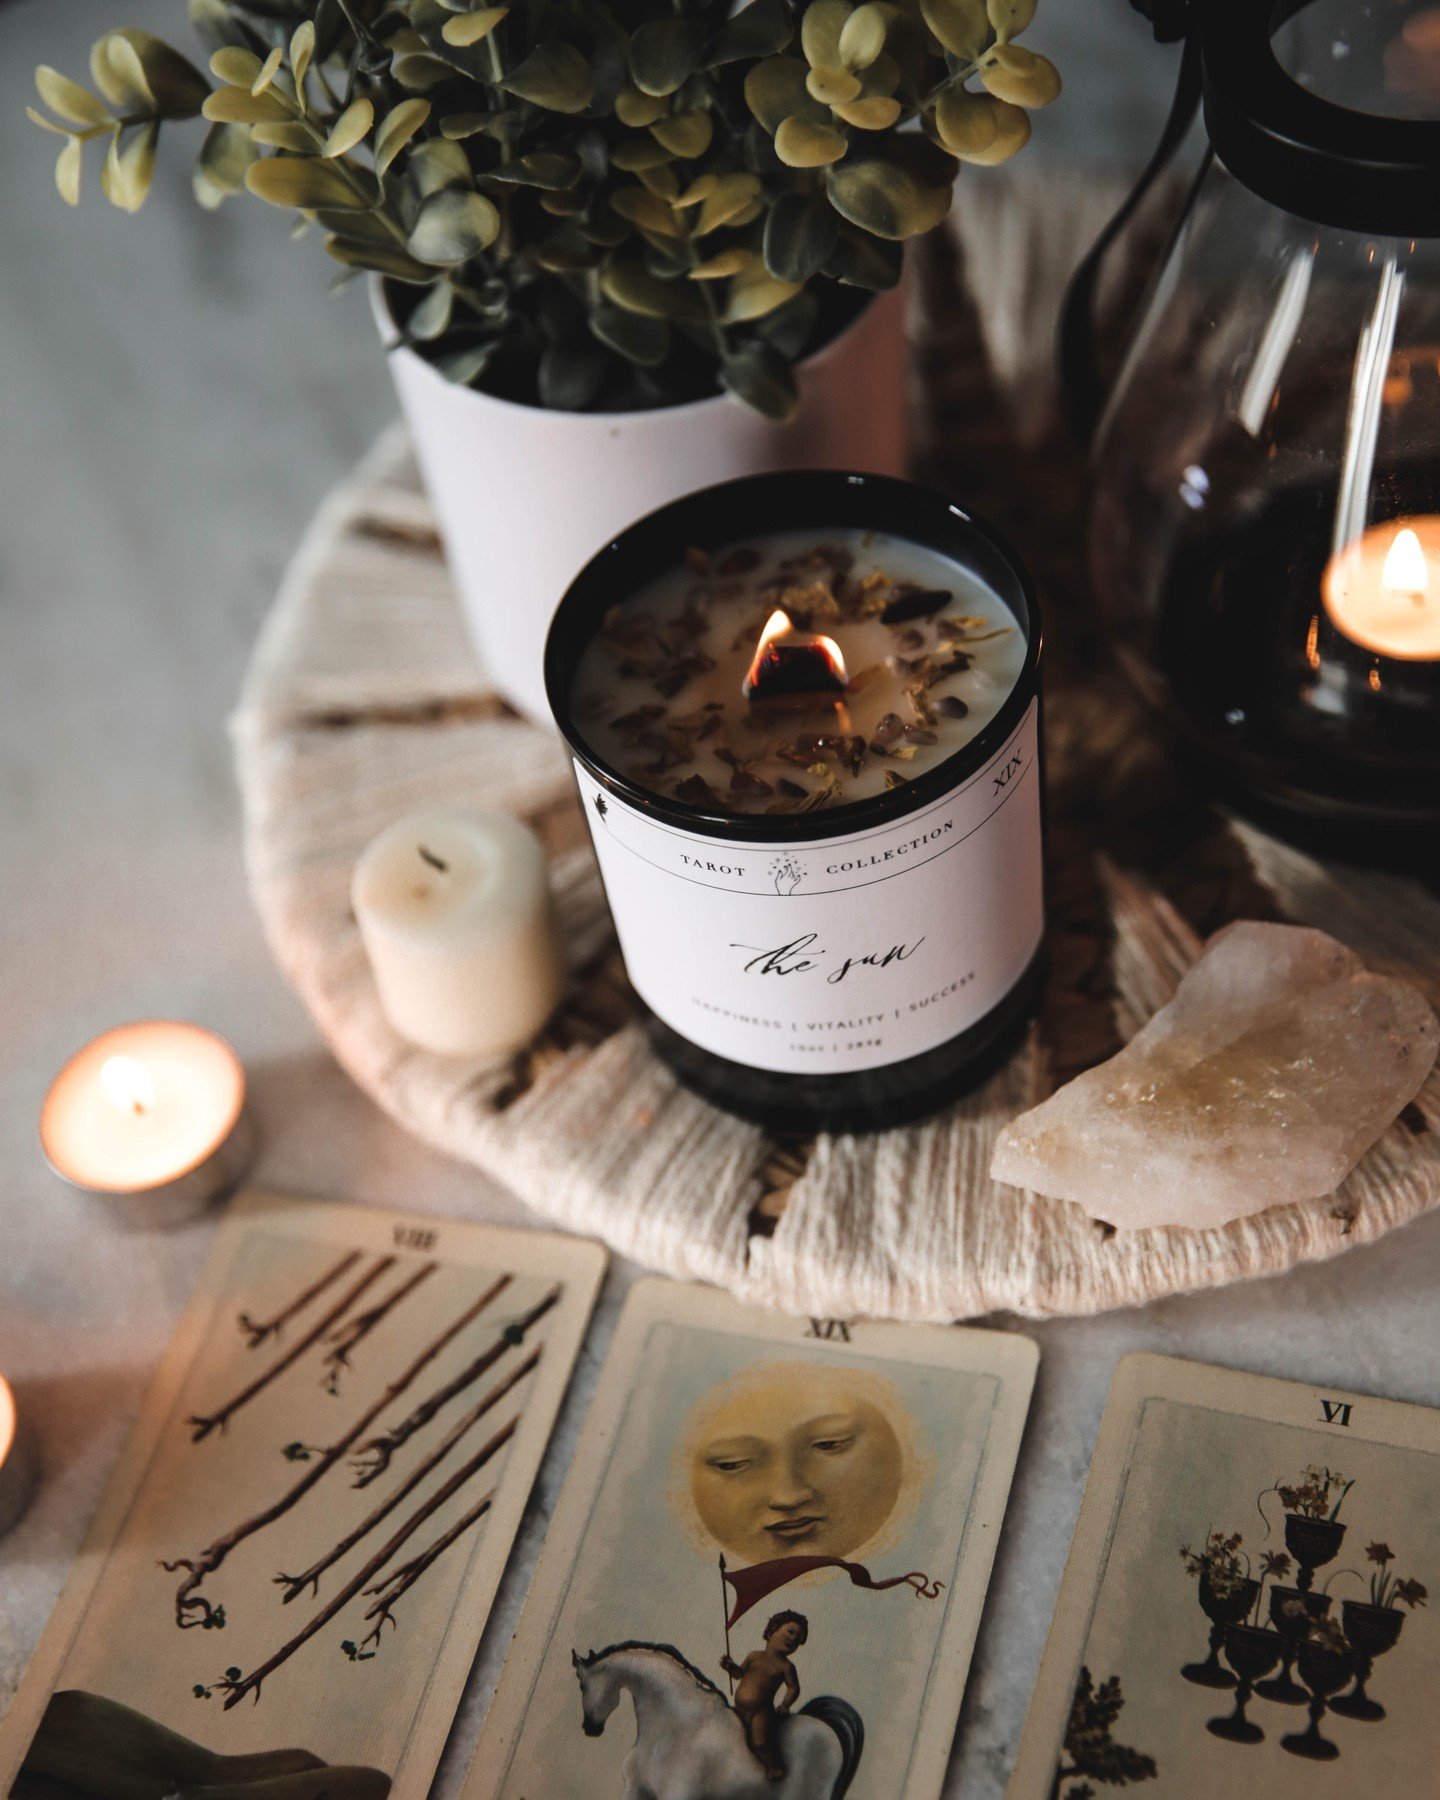 ✨🕯️ Light up your space and invite the warm light of the sun with The Sun Tarot Soy Candle! 🌞 

This special tarot candle is designed to bring energy and inspiration, channeling the POWERFUL symbolism that represents life energy itself. Each stunni